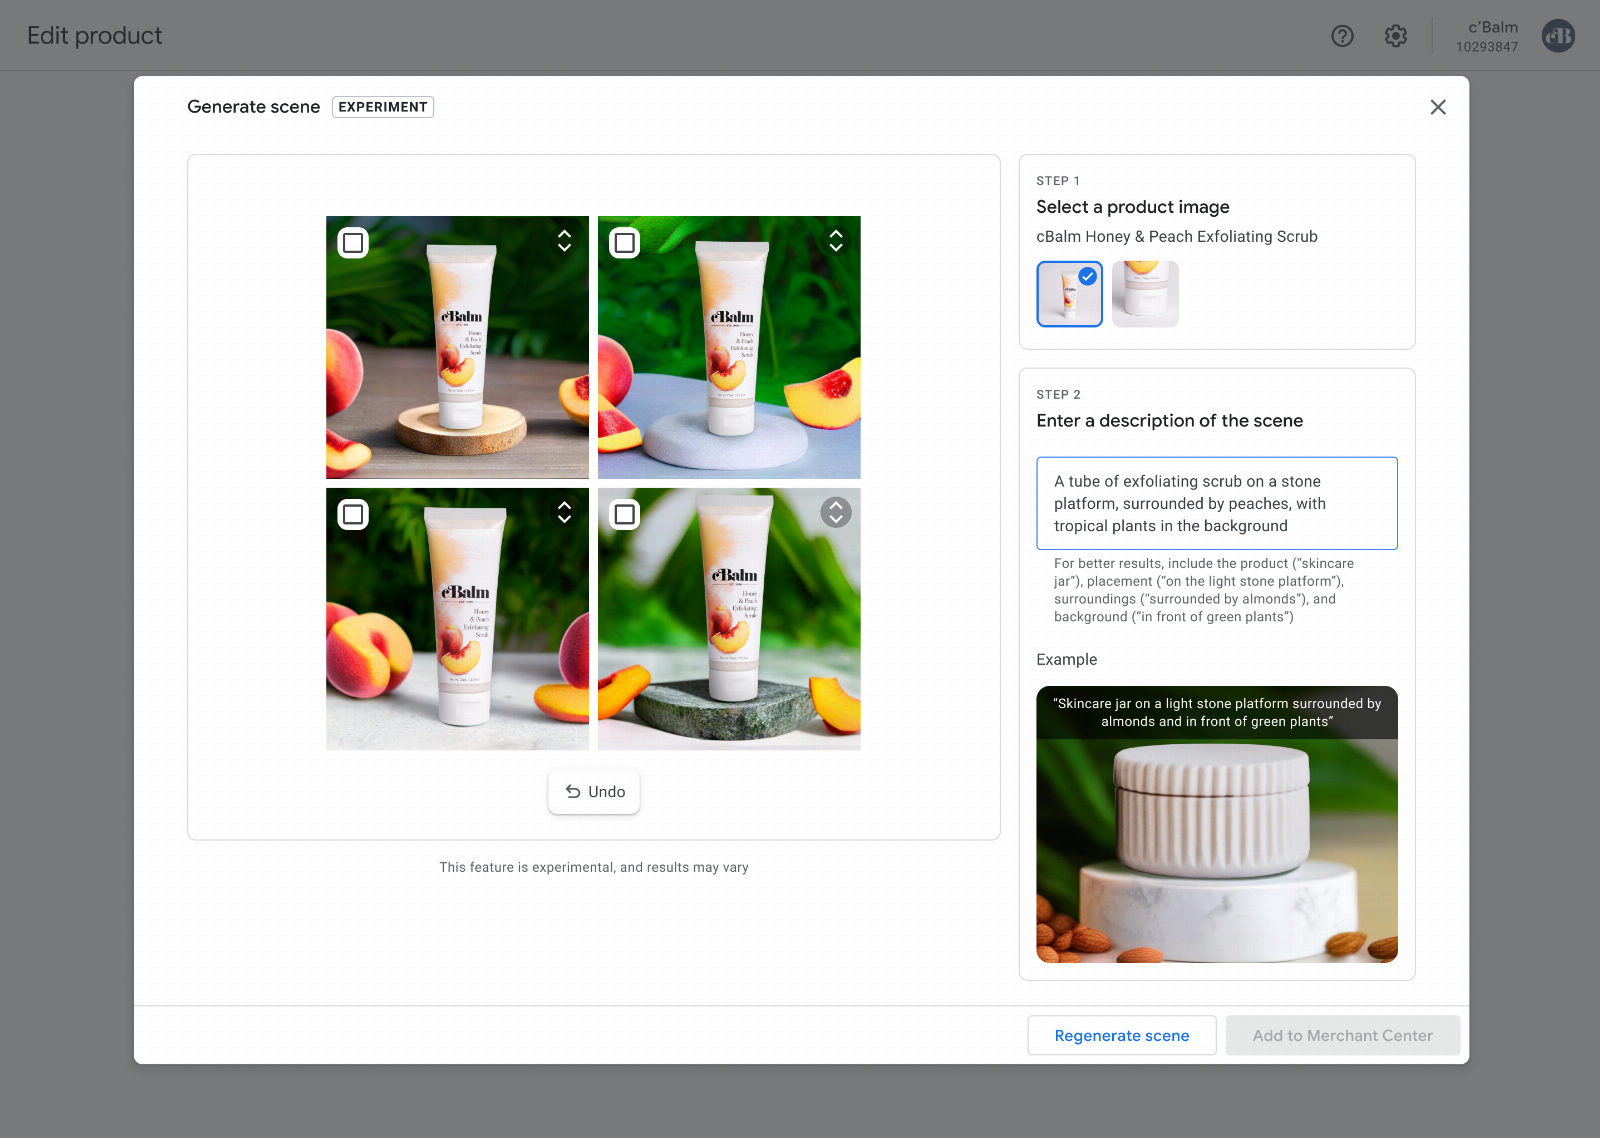 Google introduces Product Studio, a tool that lets merchants create product imagery using generative AI